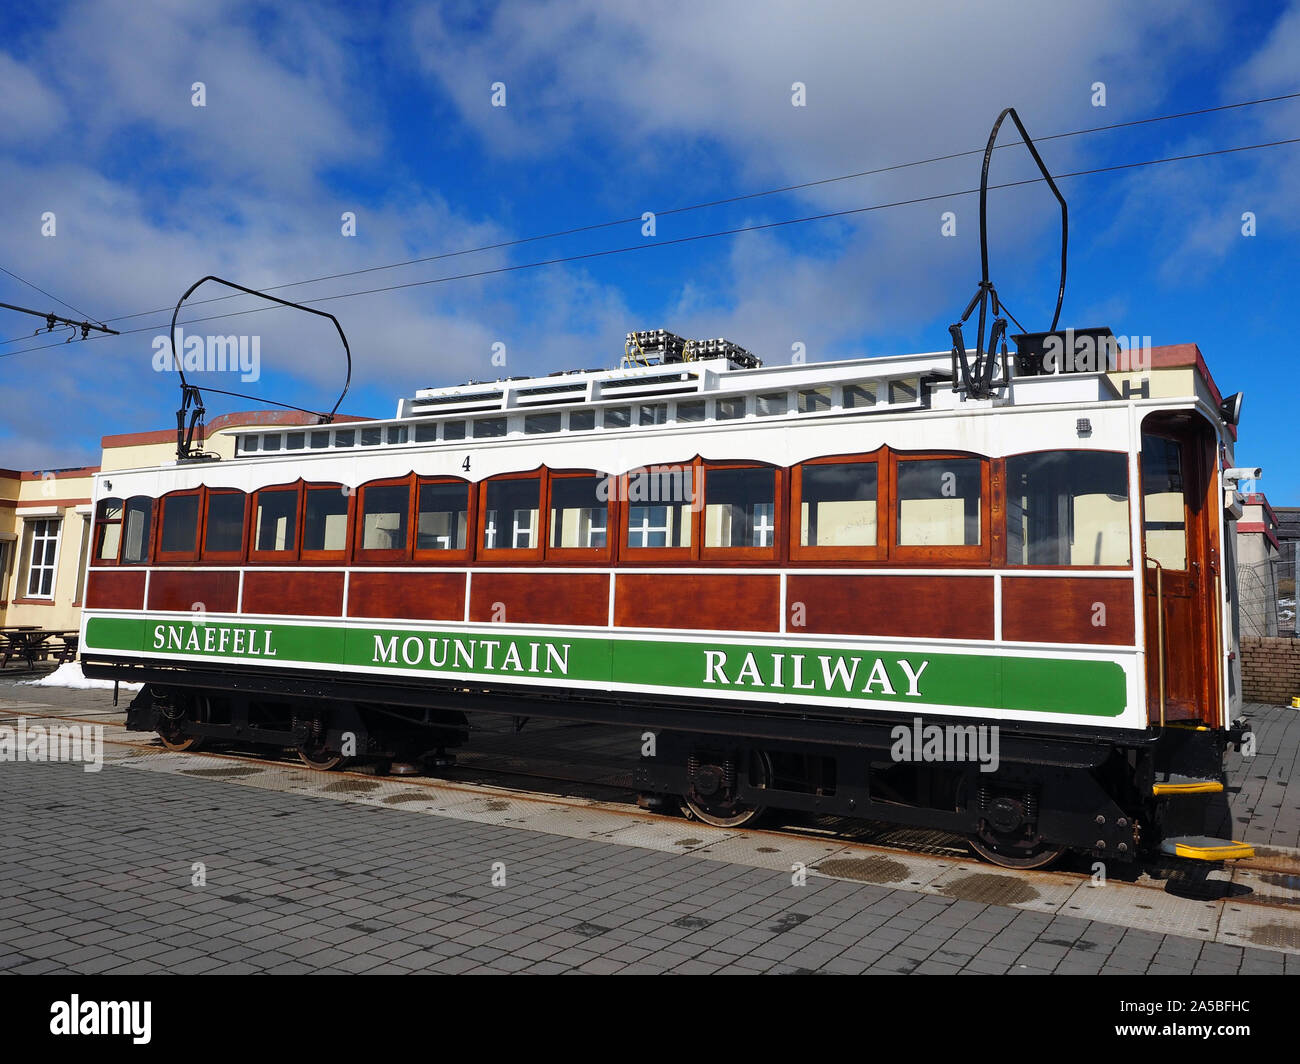 Snaefell Mountain Railway car at Snaefell station, Isle of Man, UK Stock Photo